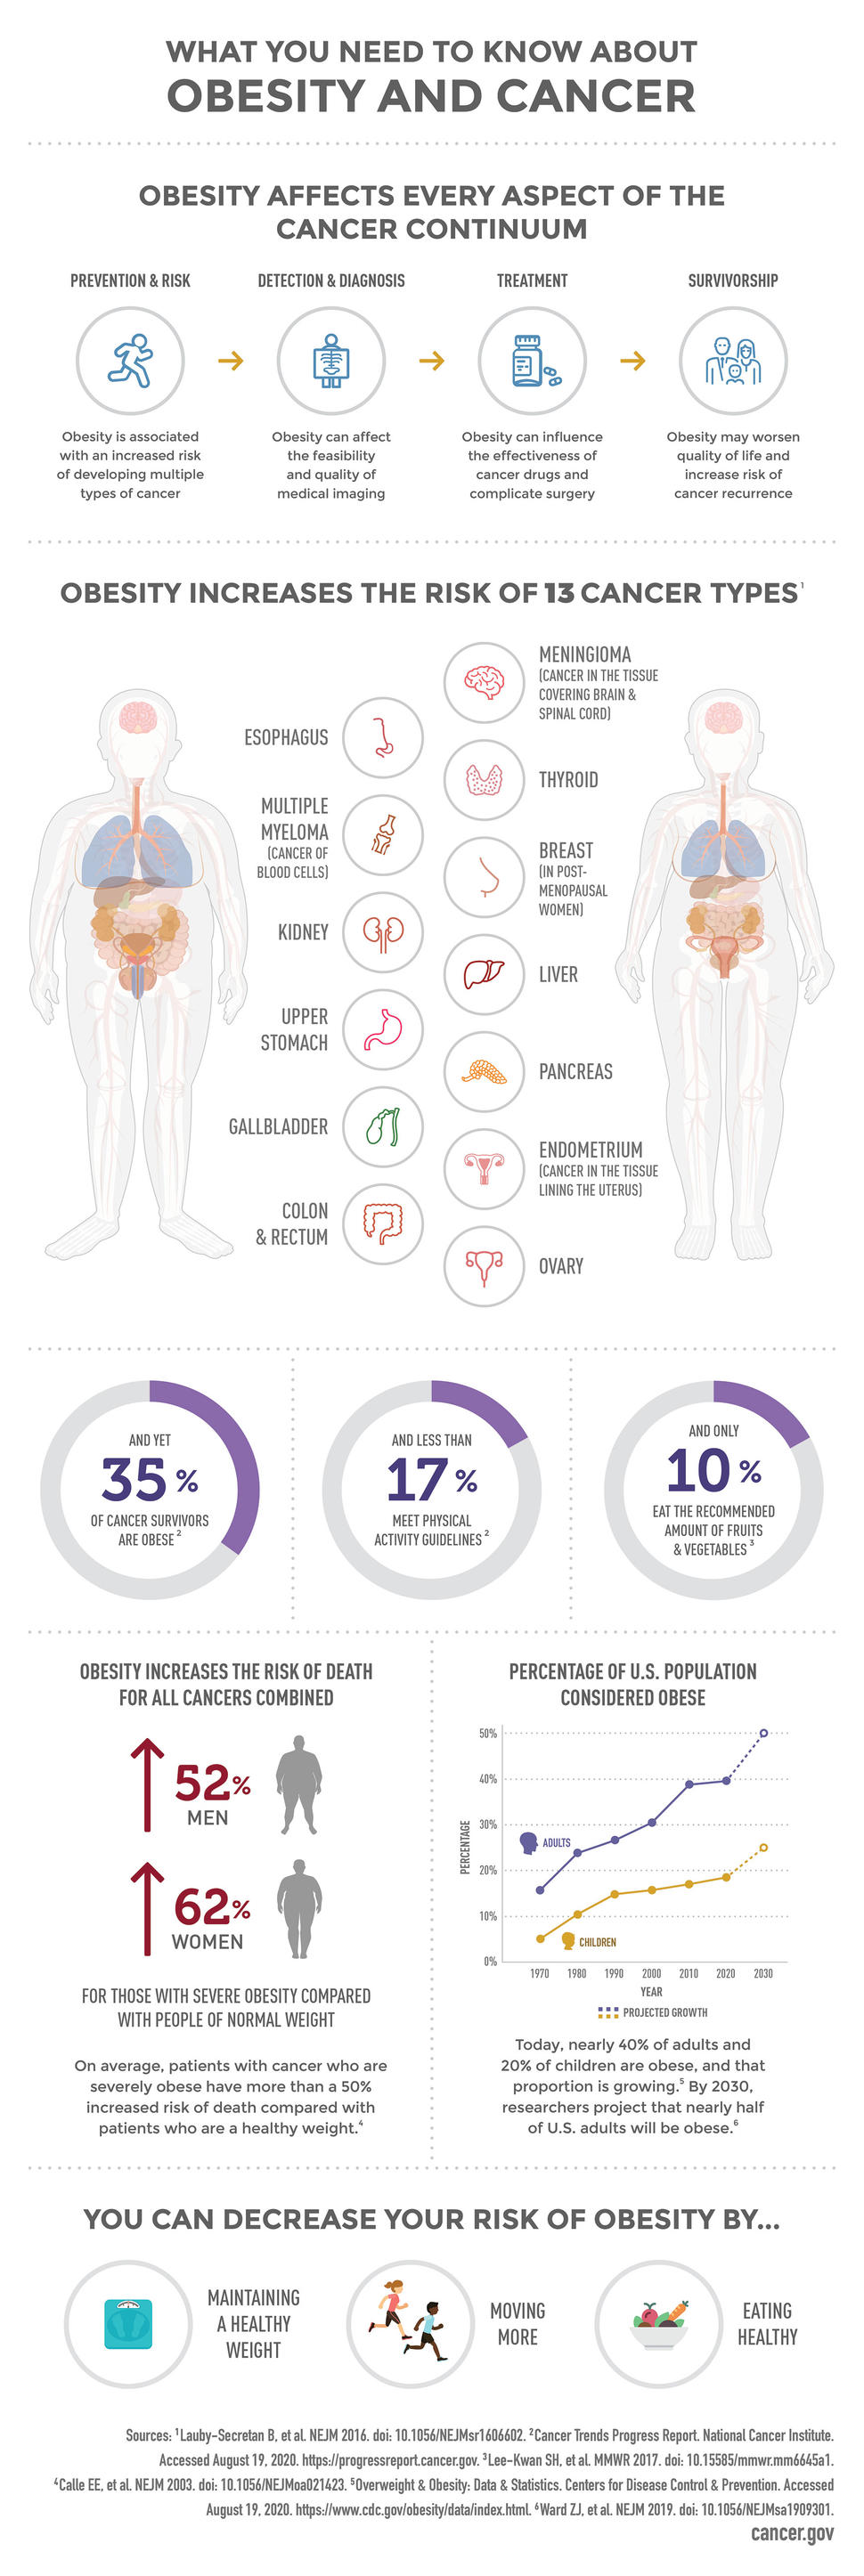 What You Need to Know About Obesity and Cancer Infographic